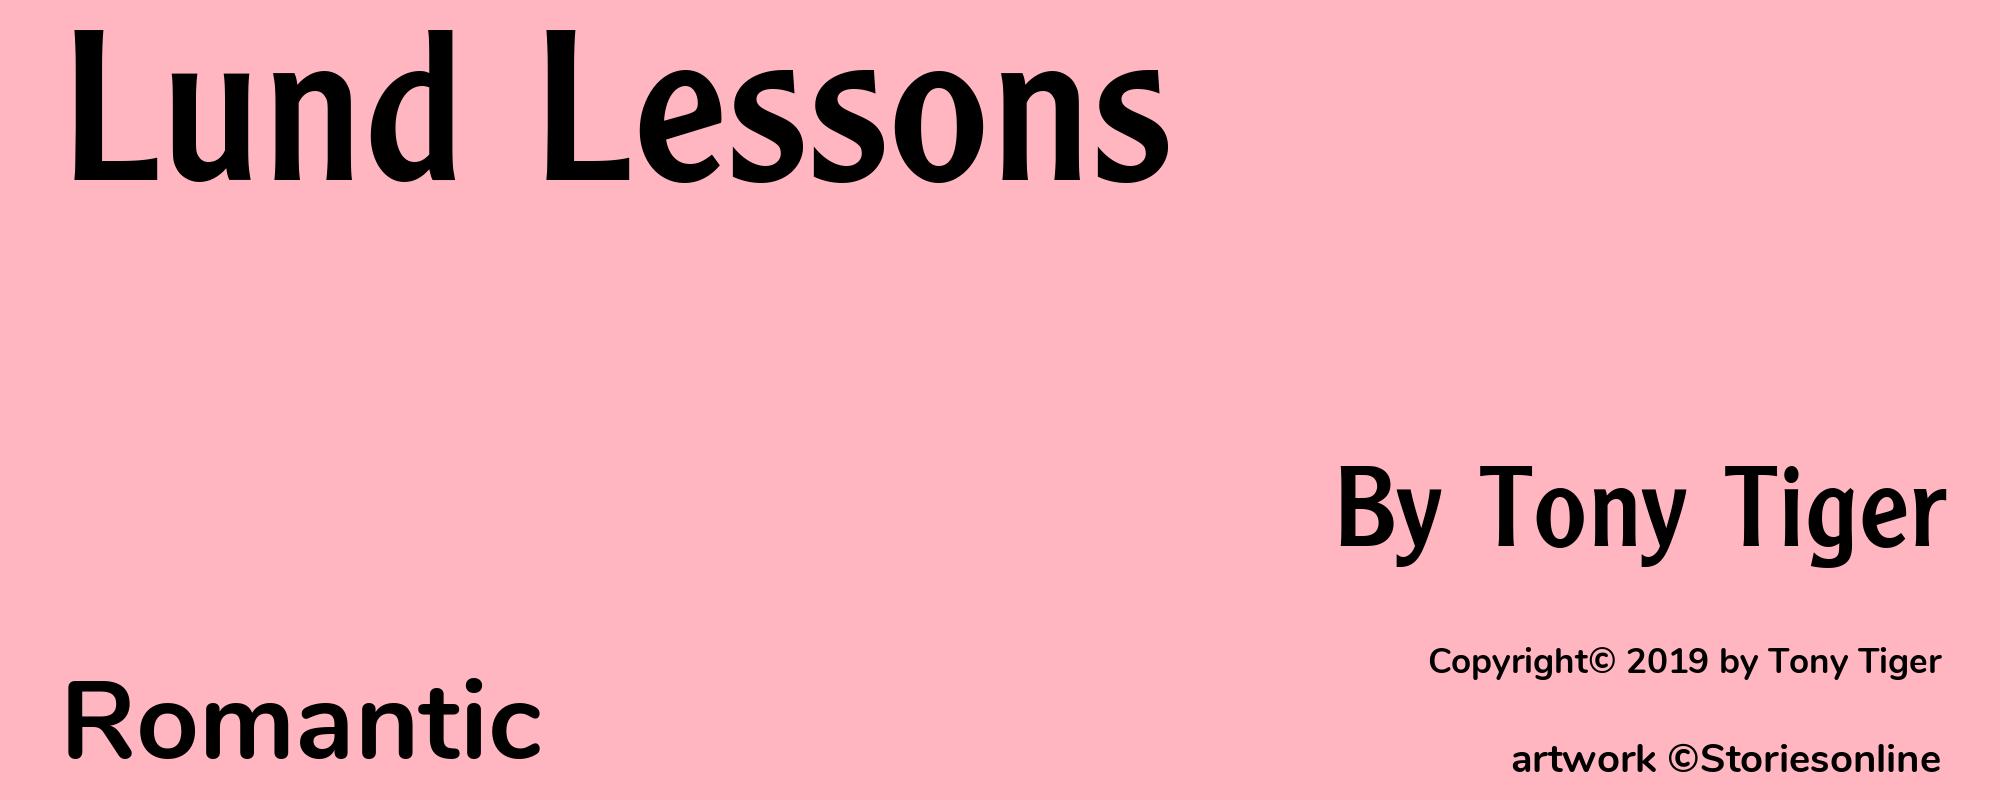 Lund Lessons - Cover